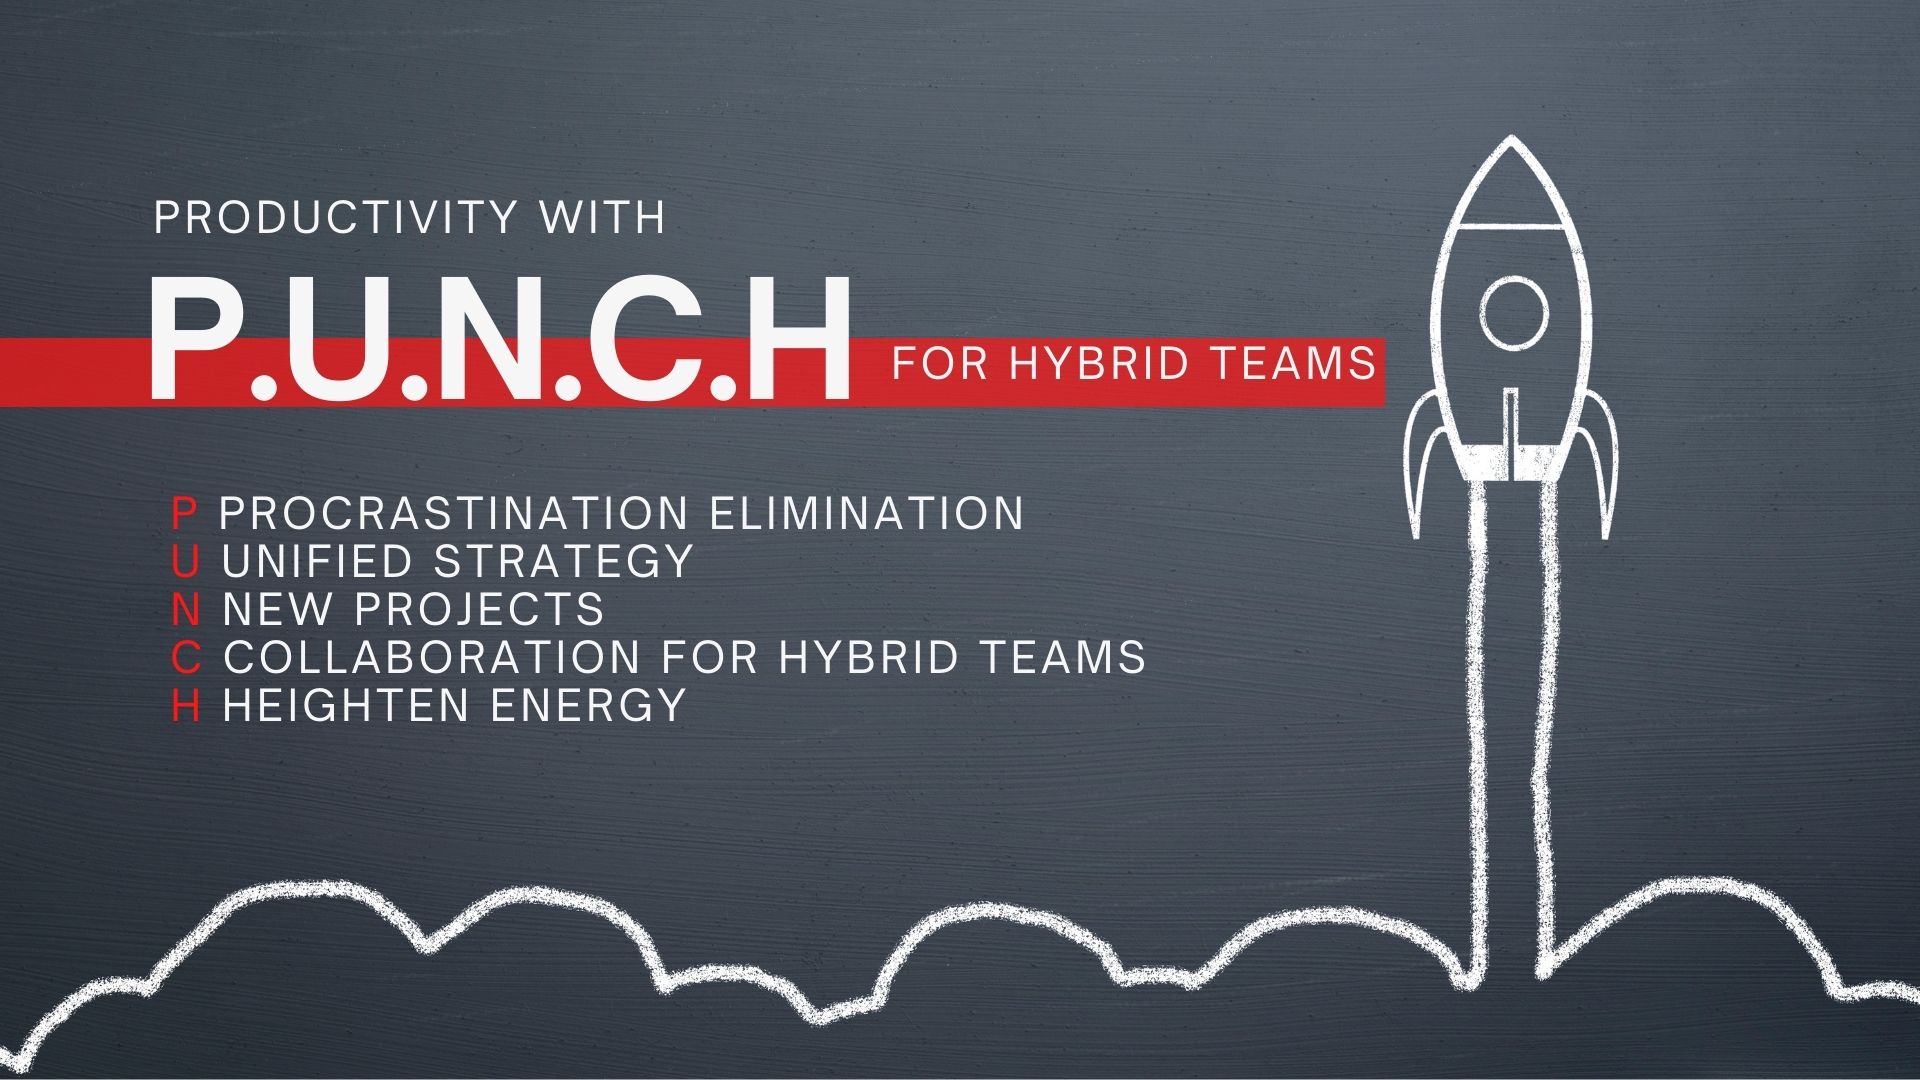 PUNCH for hybrid teams